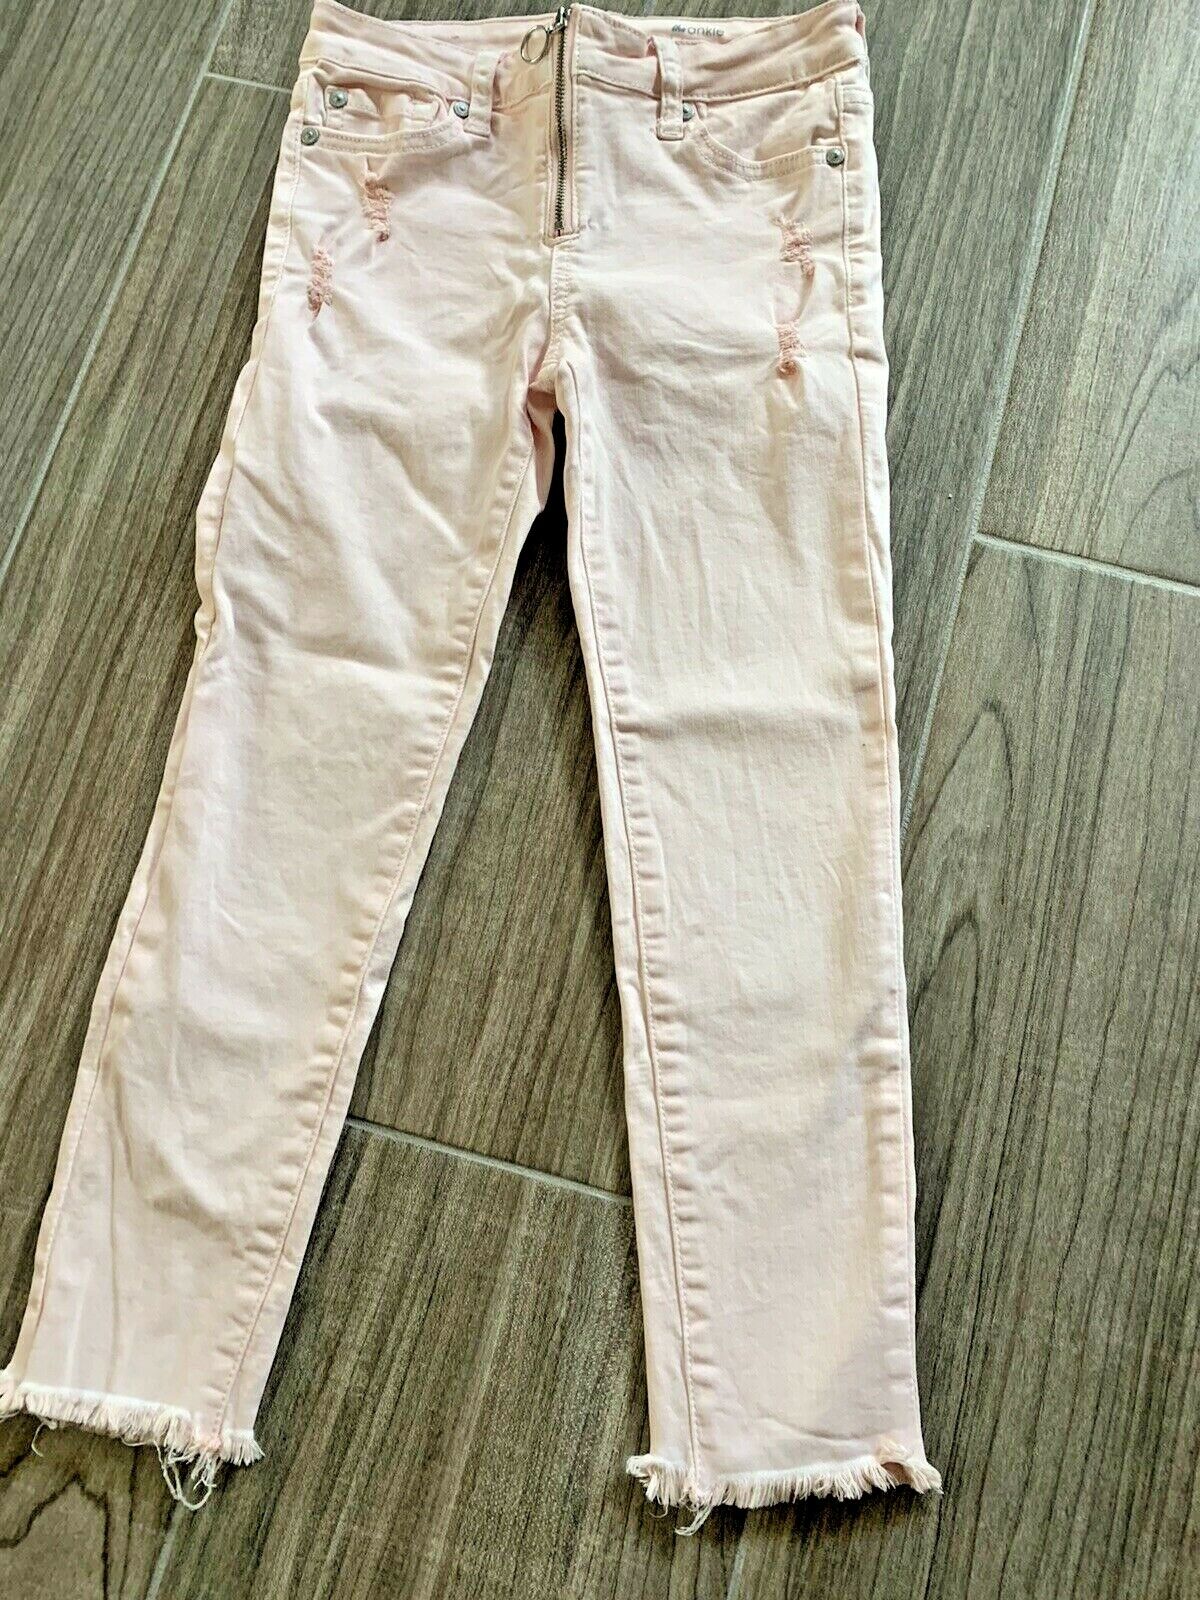 Girls 7 For All Mankind - The Ankle Skinny Jeans - Light Pink Distressed - Sz 10